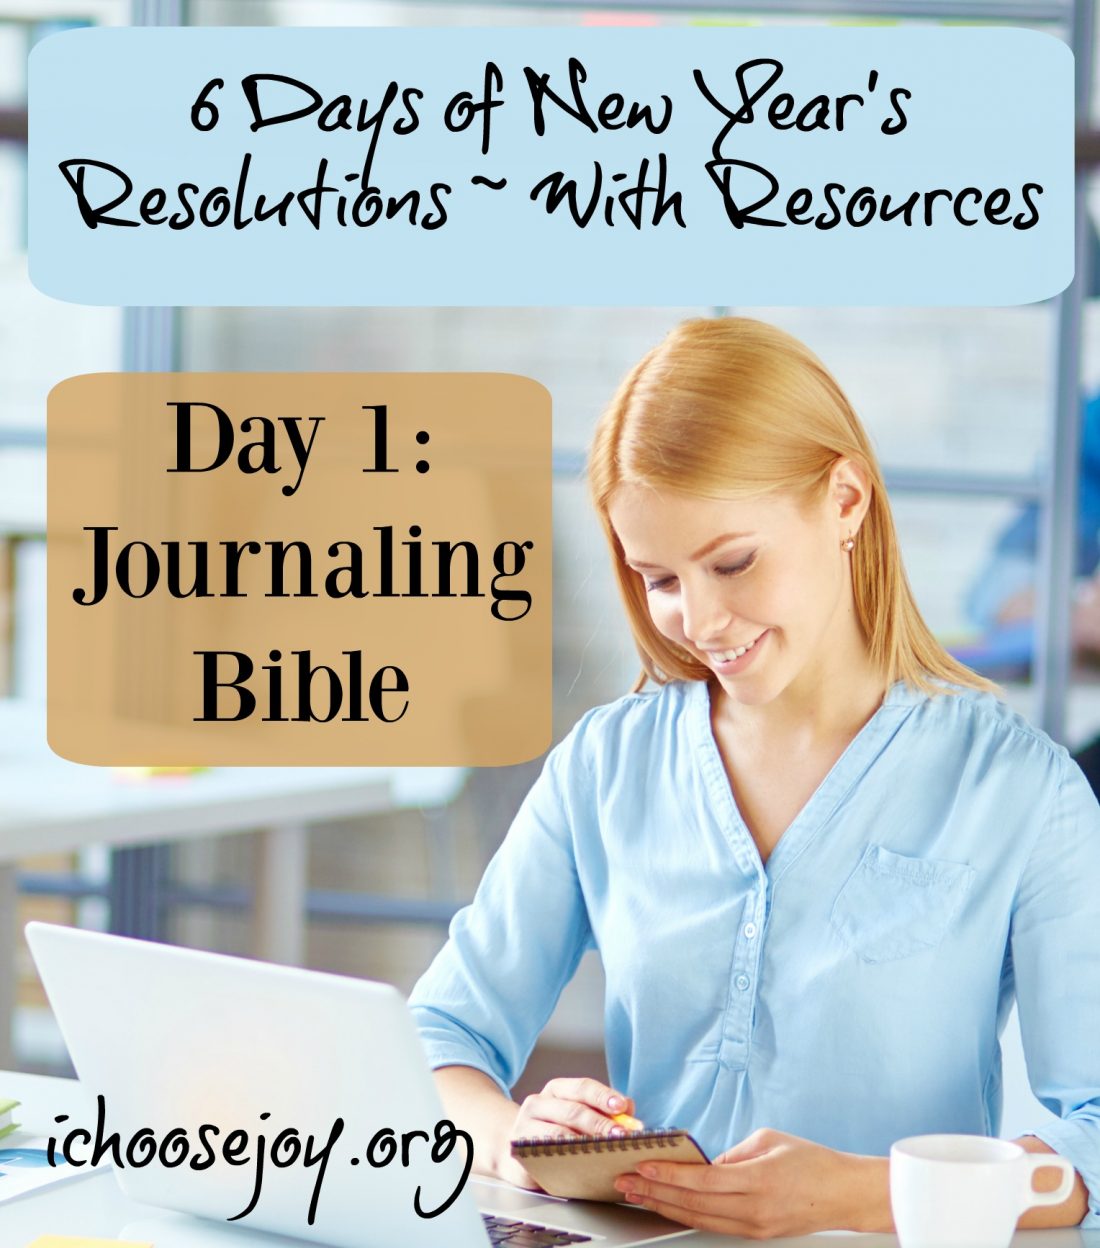 Journaling Bible: Day 1 of “6 Days of New Year’s Resolutions”